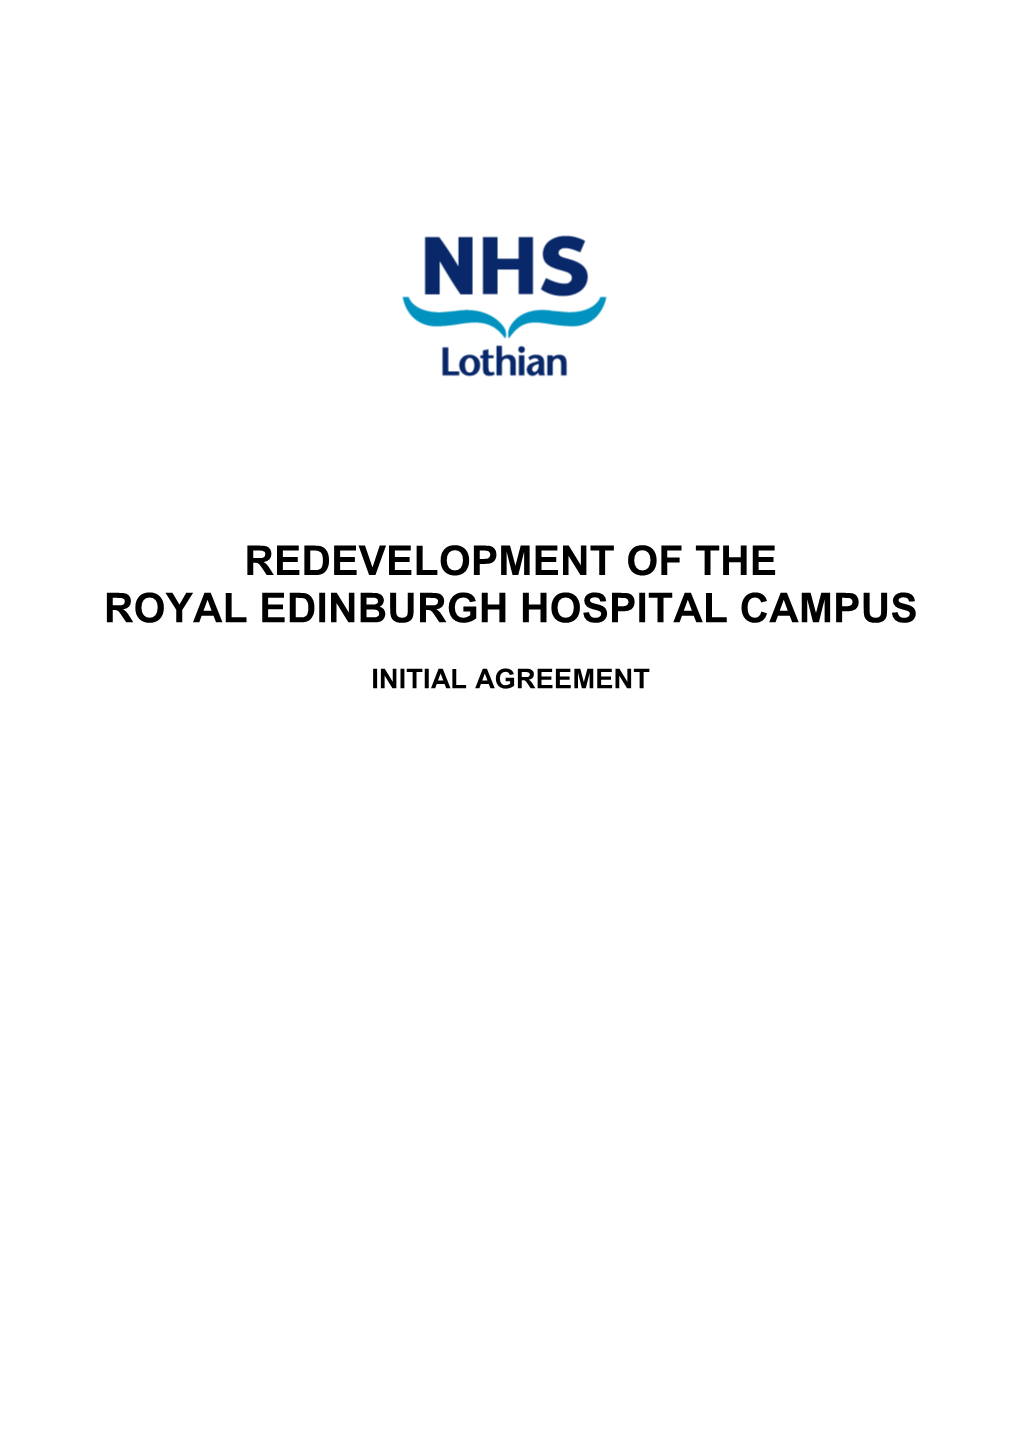 Initial Agreement for the Royal Edinburgh Hospital Campus Right